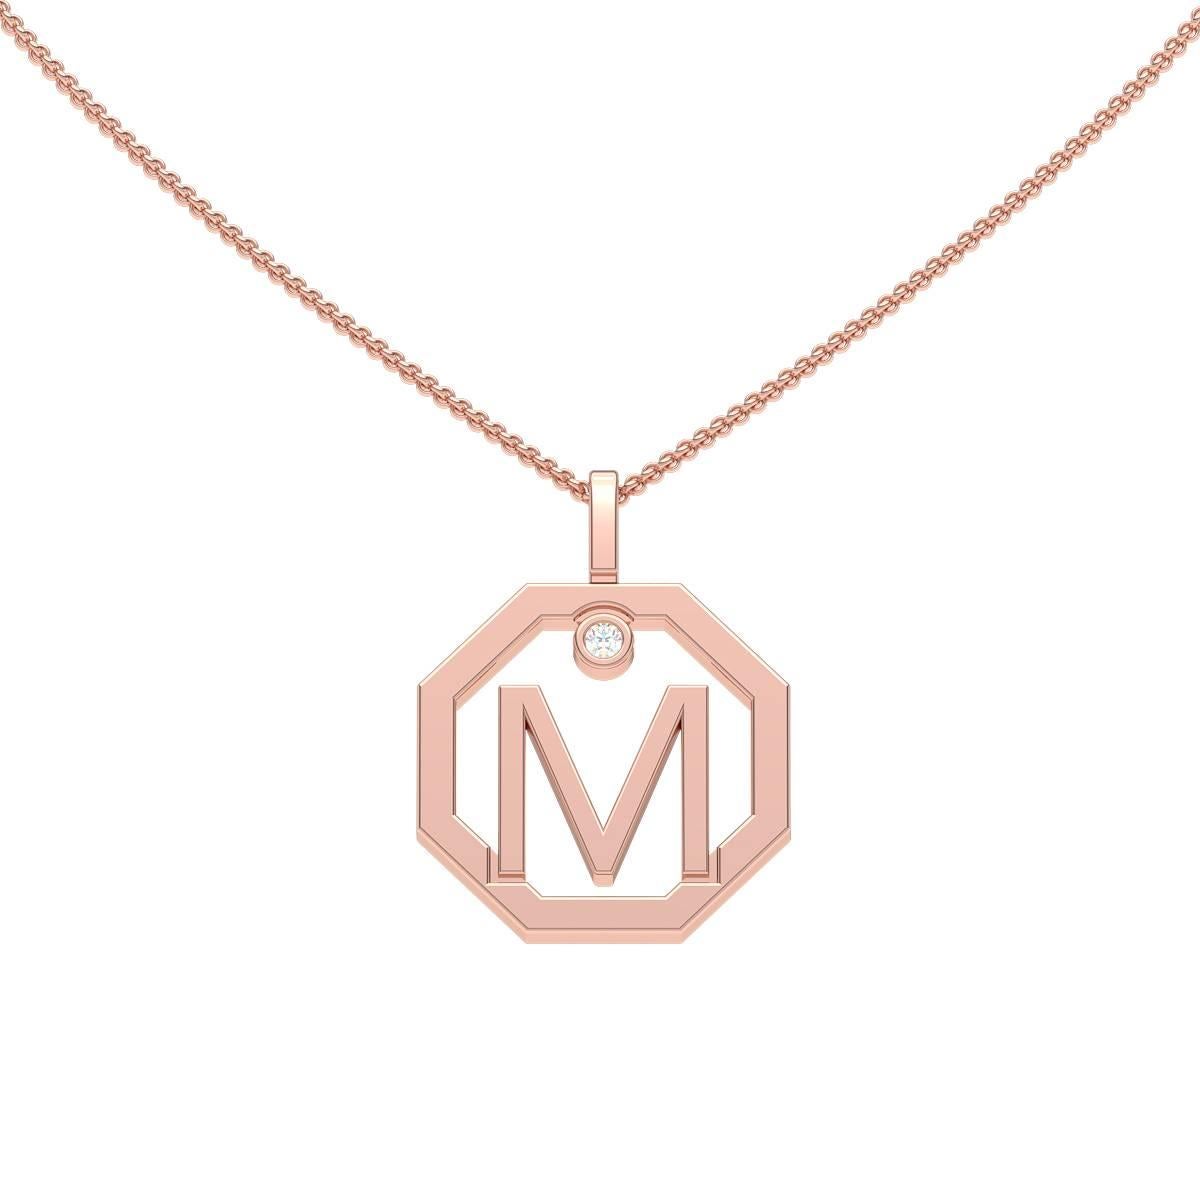 Our diamond initial pendant makes the perfect personalised gift. Handcrafted to order in our Sydney studios in 18 karat yellow/white/rose gold and set with a sparkling diamond, this timeless octagonal pendant is sure to delight. Chain is sold